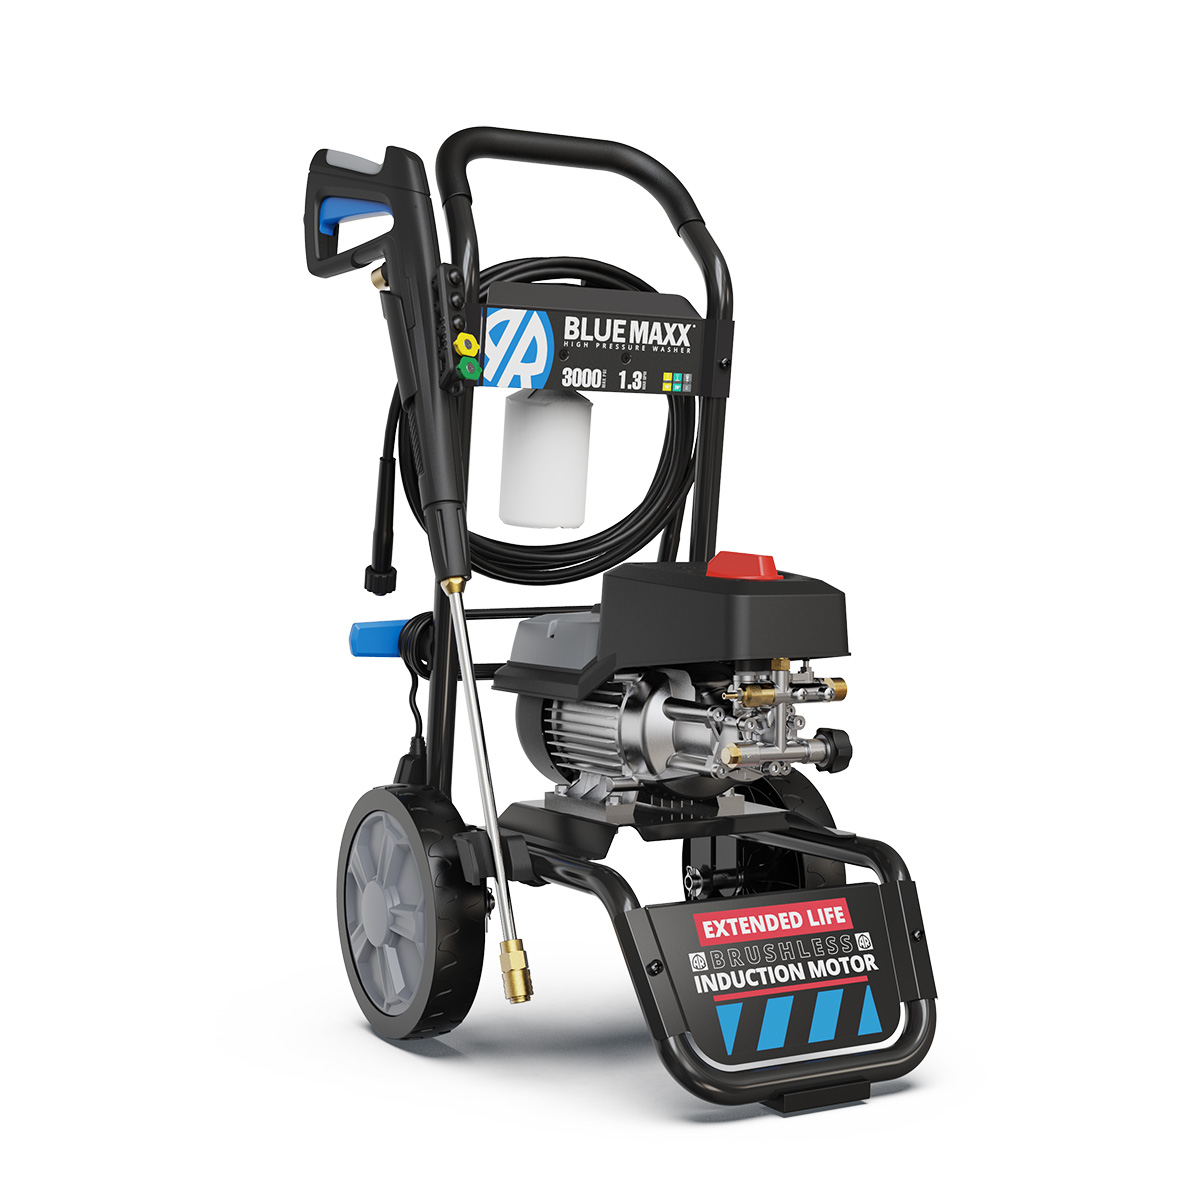 Is there a recommended surface cleaner for the Maxx3000?